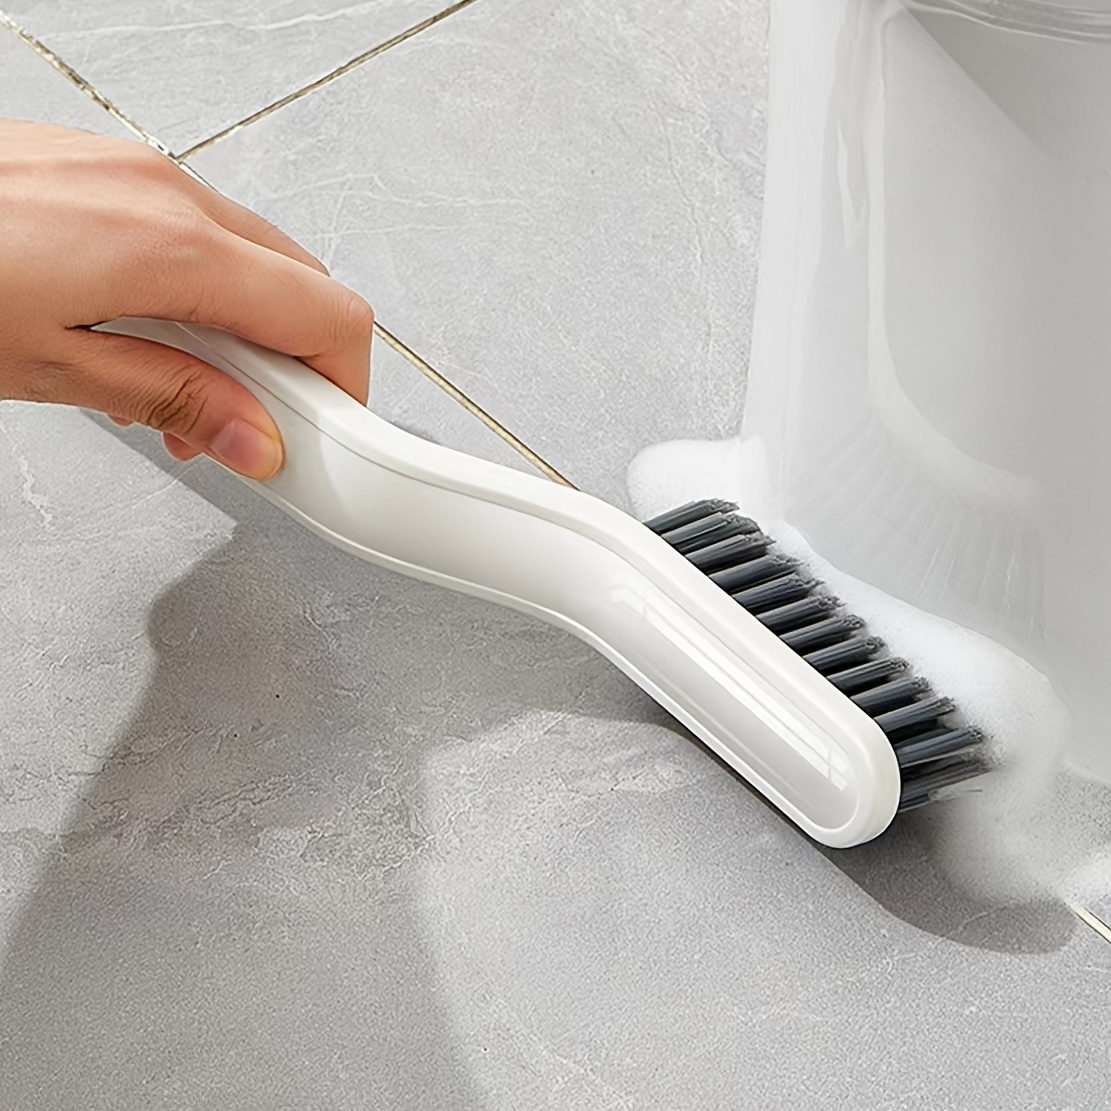 Grout Cleaner Brush - Tile Joint Cleaning Scrubber Brush with Nylon  Bristles - Great Use for Deep Cleaning  Shower,Floors,Window,Bathroom,Kitchen,Track